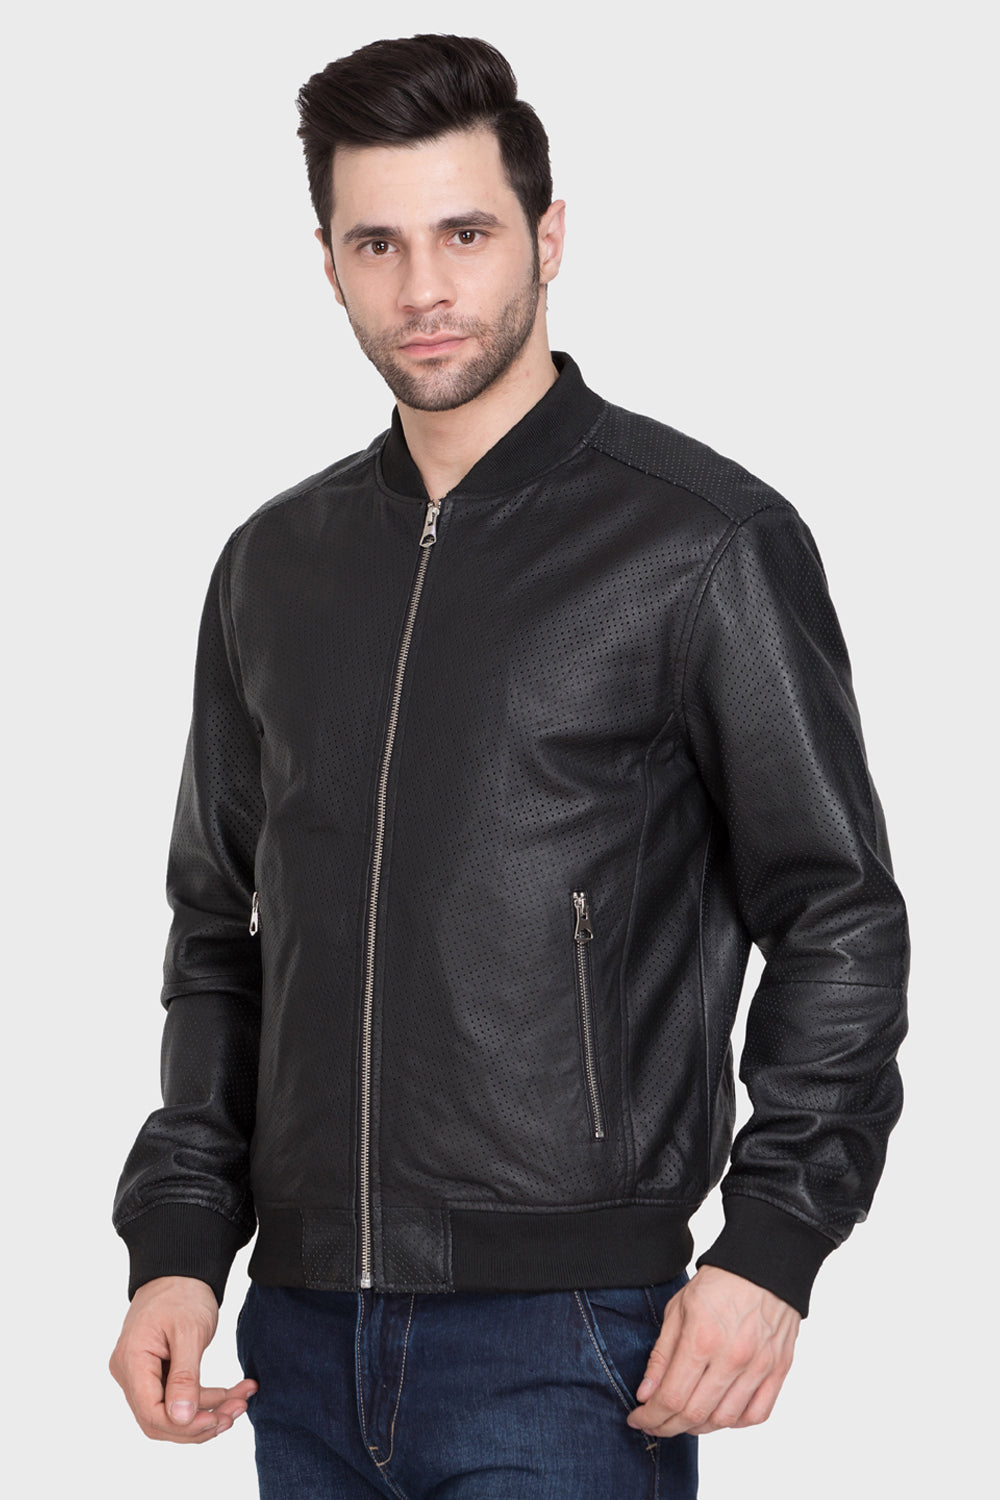 Justanned Perforated Bomber Jacket